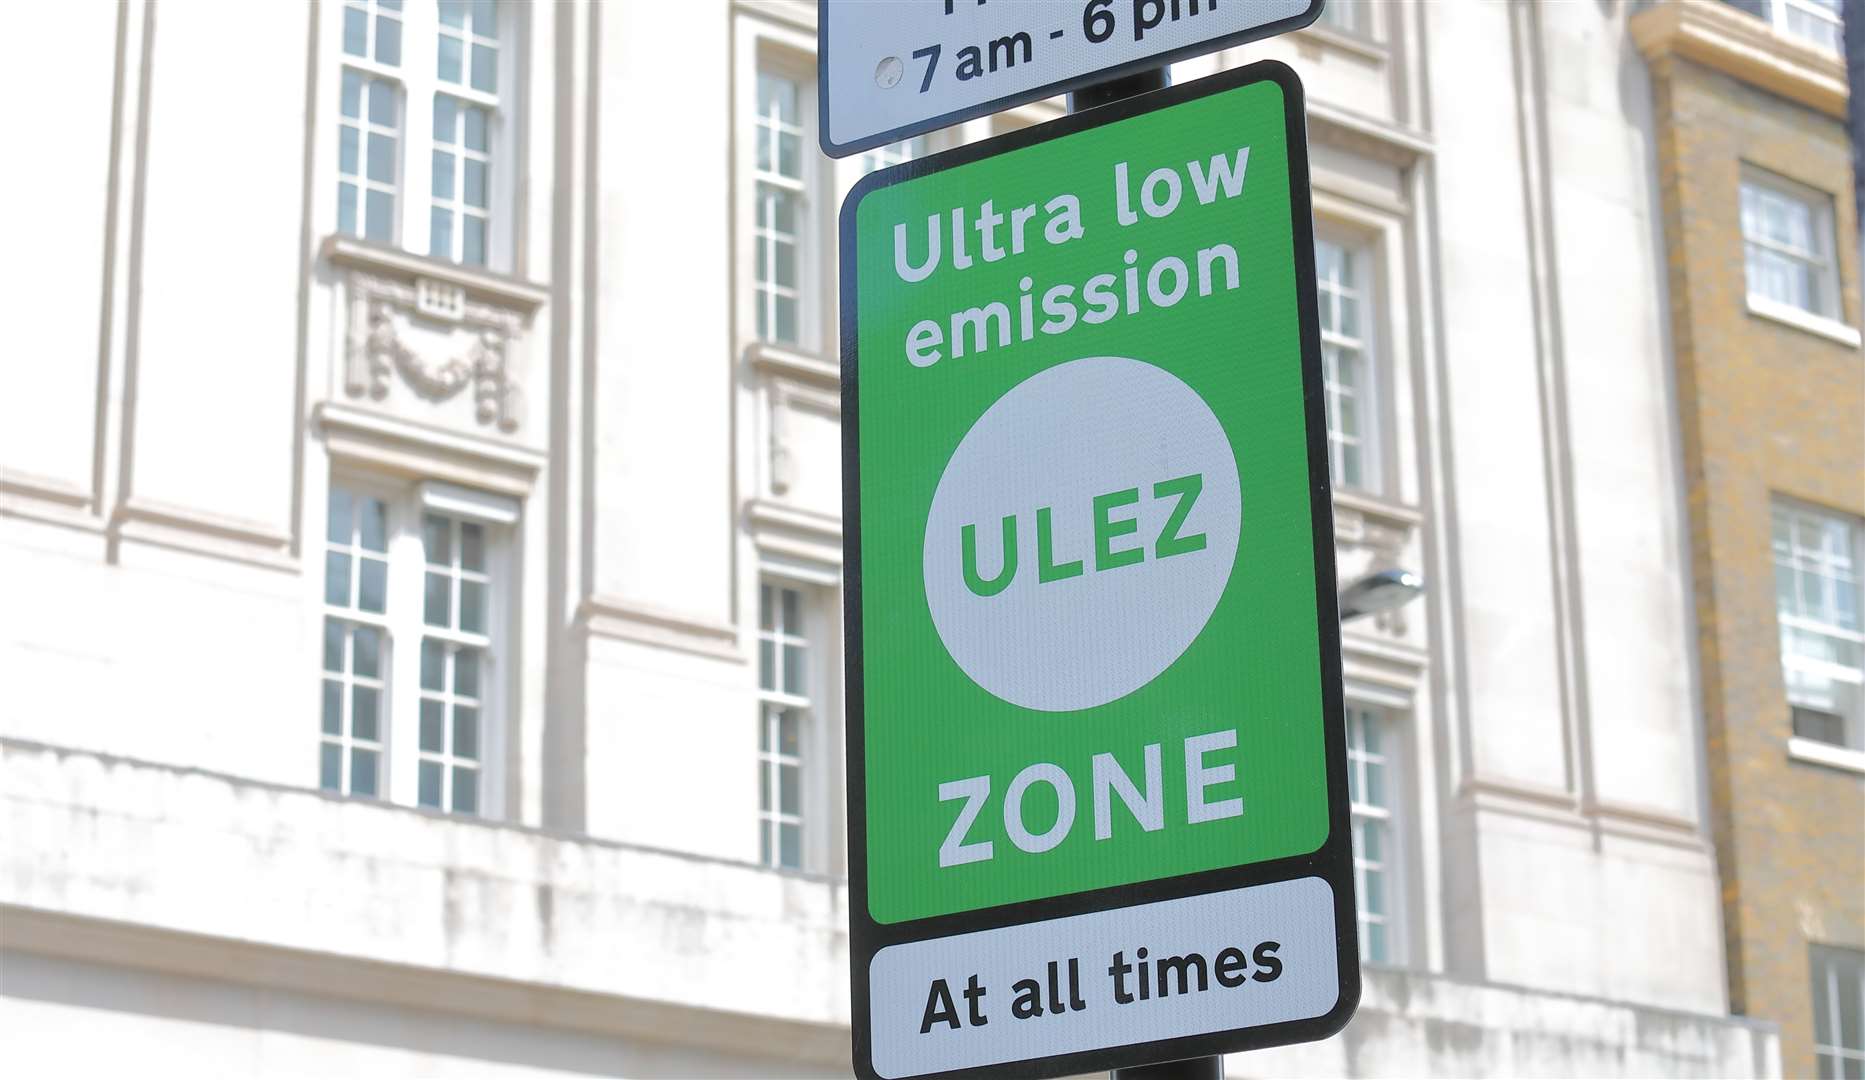 The London ULEZ Zone is set to expand.